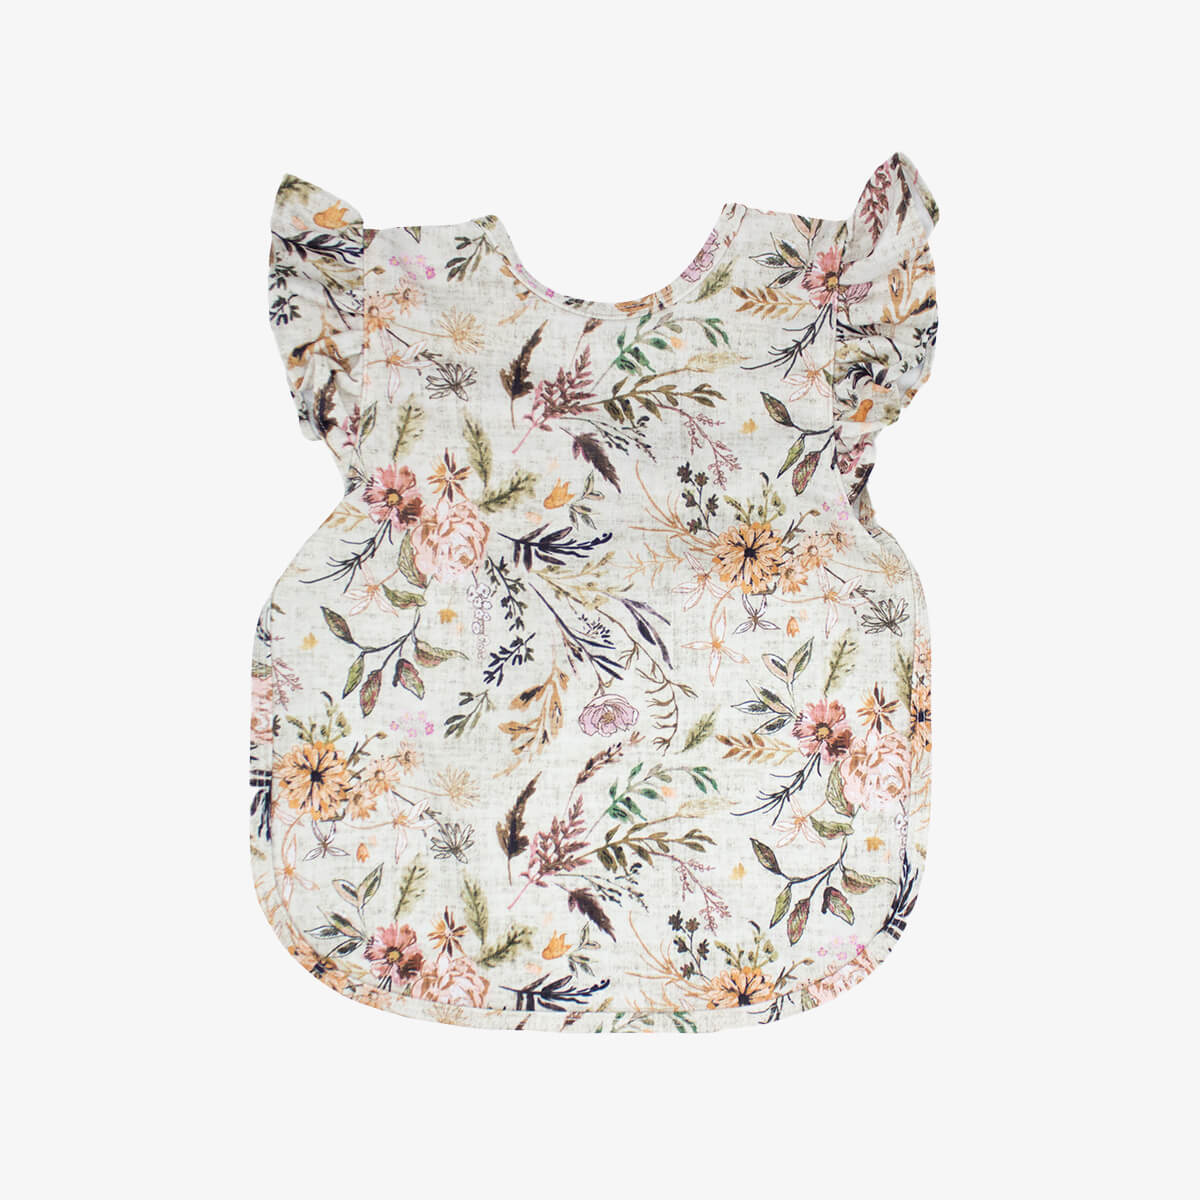 BapronBaby® Bapron in Delilah Floral with Flutter Sleeves / Bib + Apron That Safely Ties Around the Body